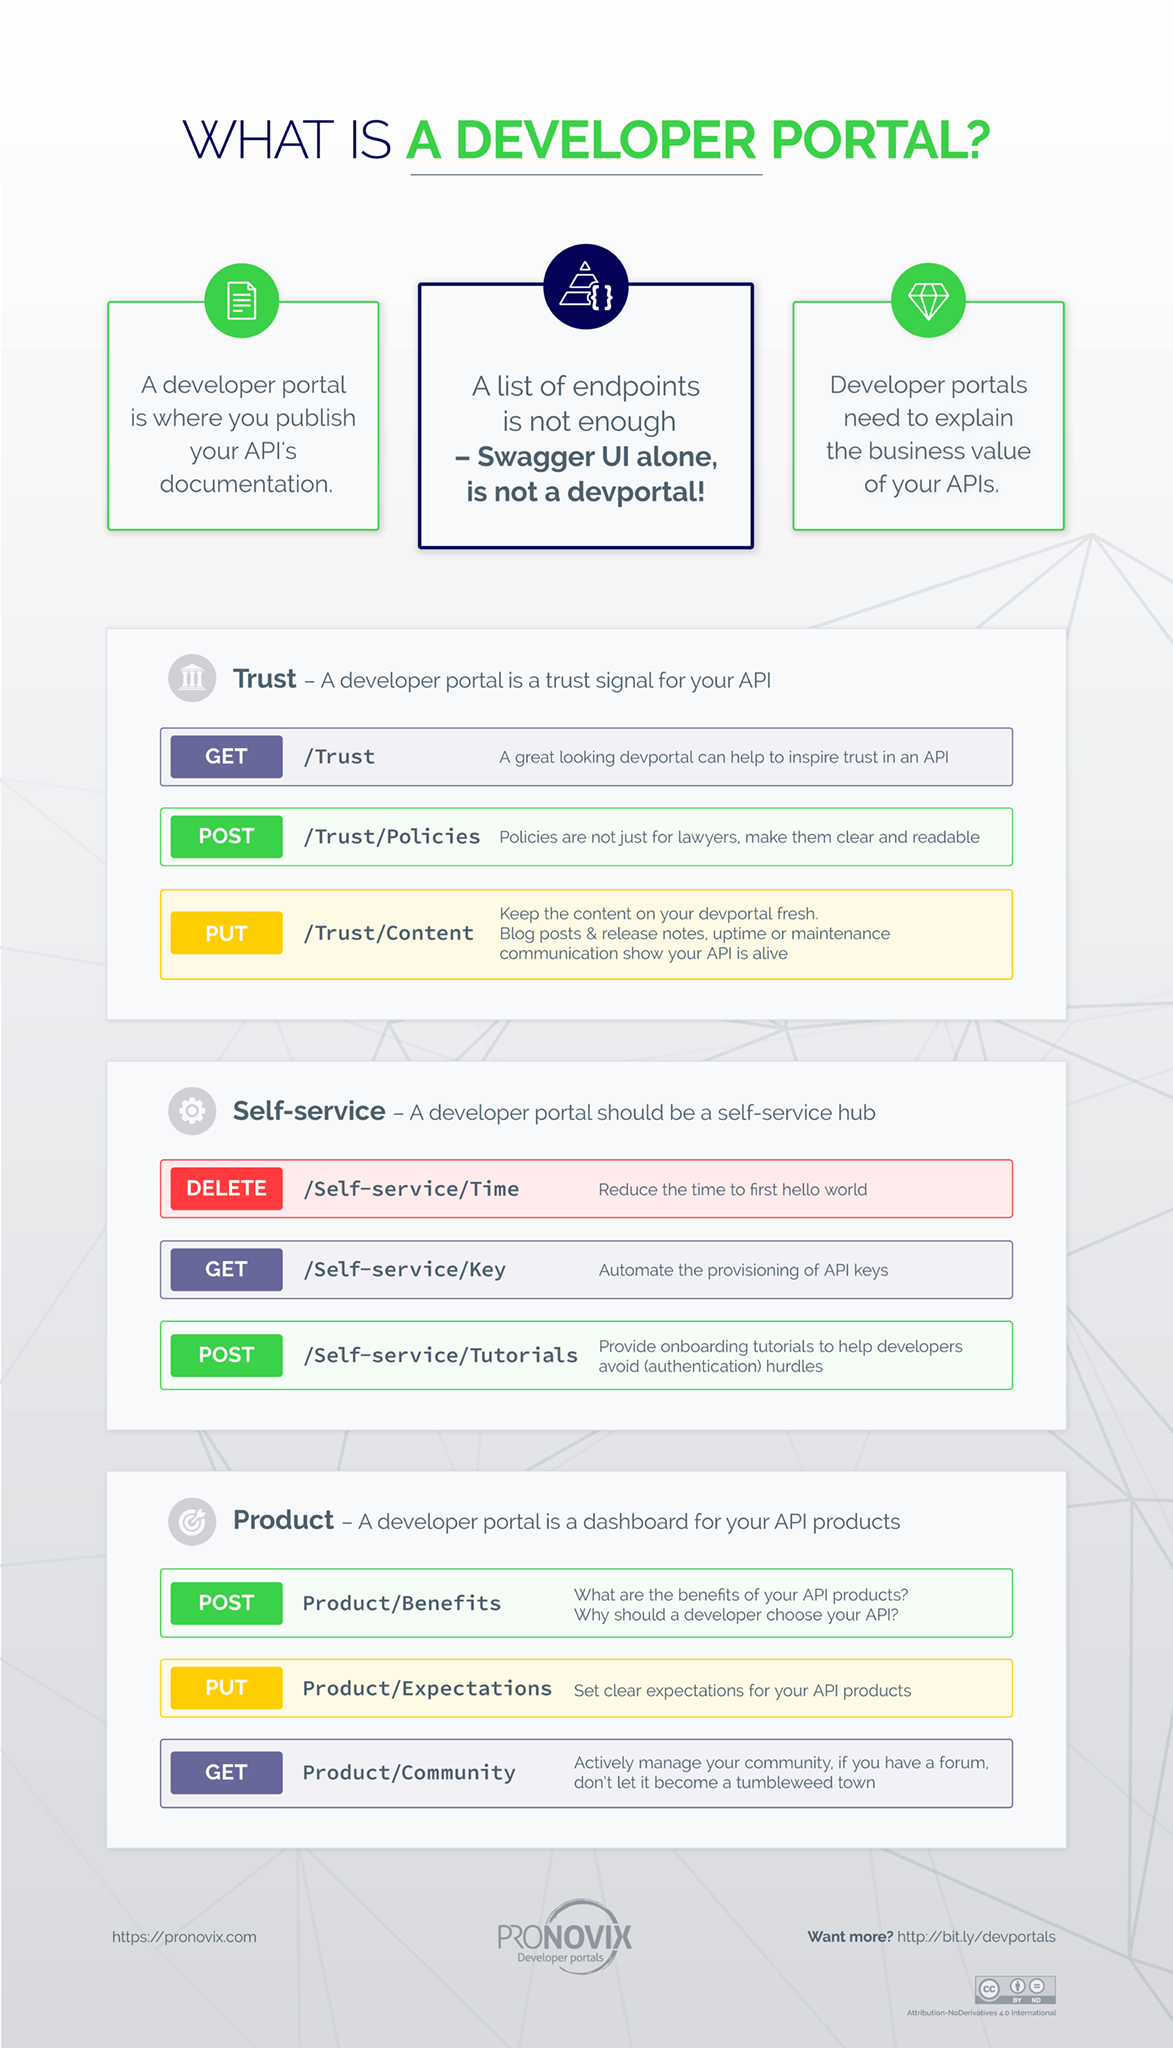 Infographic: What Is a Developer Portal? A trust signal for your API. A self-service hub. A dashboard for your API products. A list of endpoints is not enough.